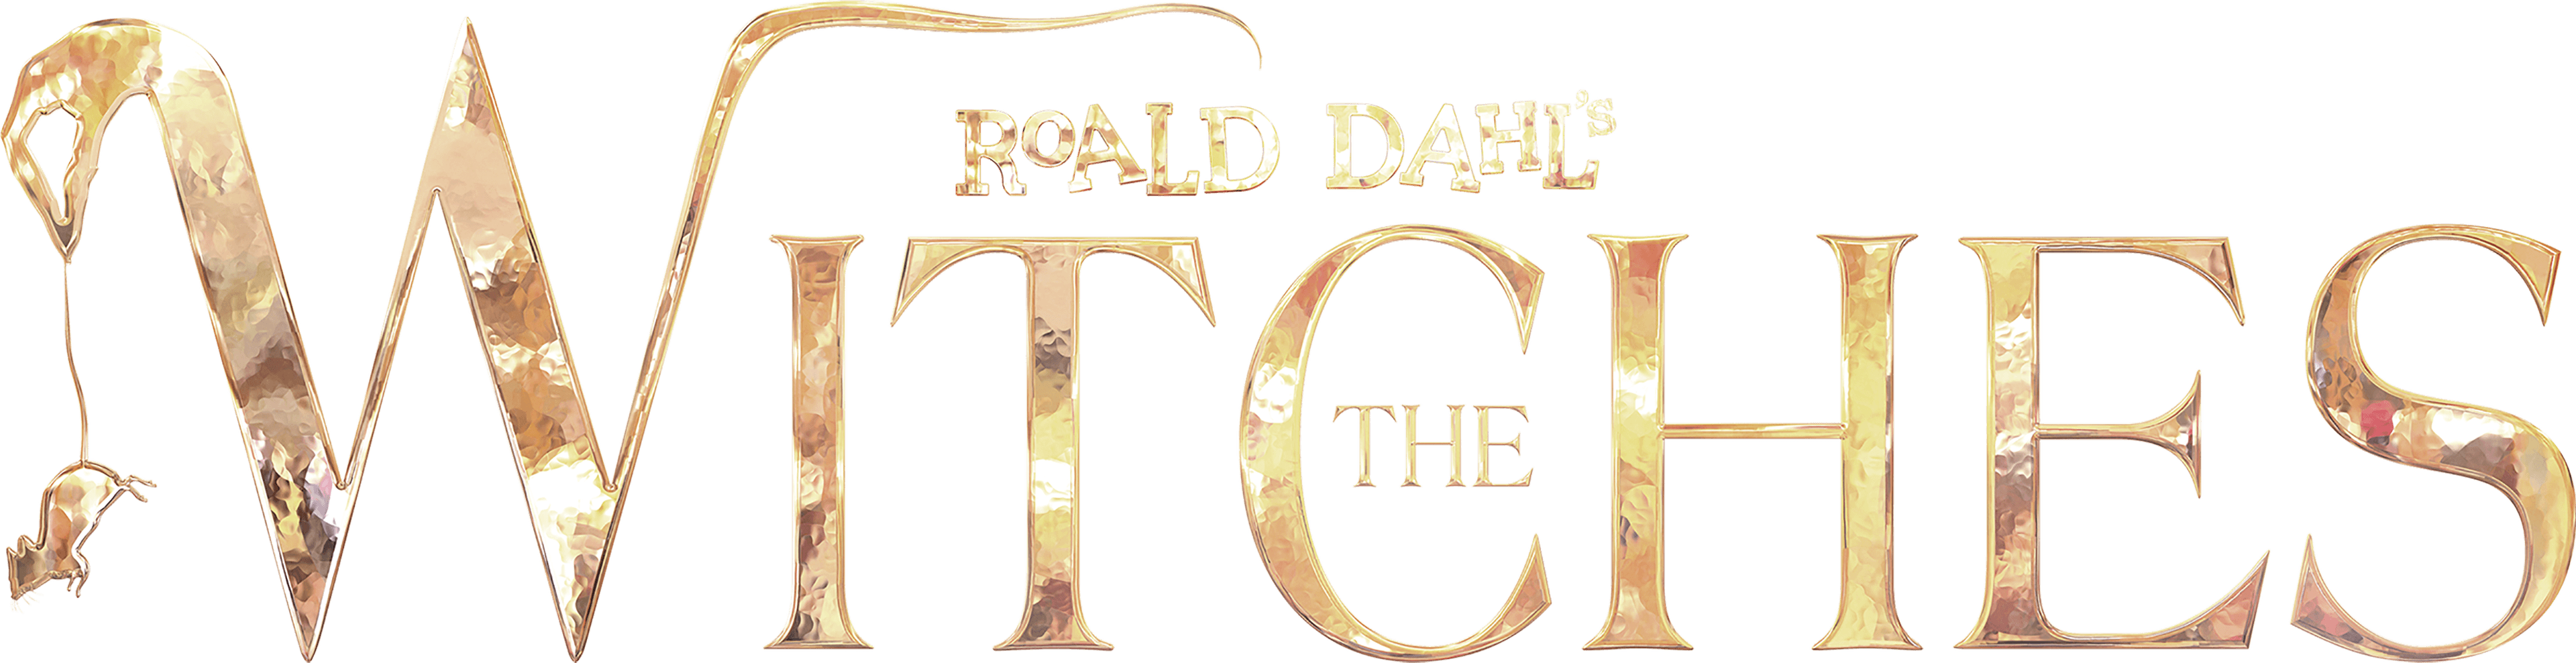 Roald Dahl's The Witches logo